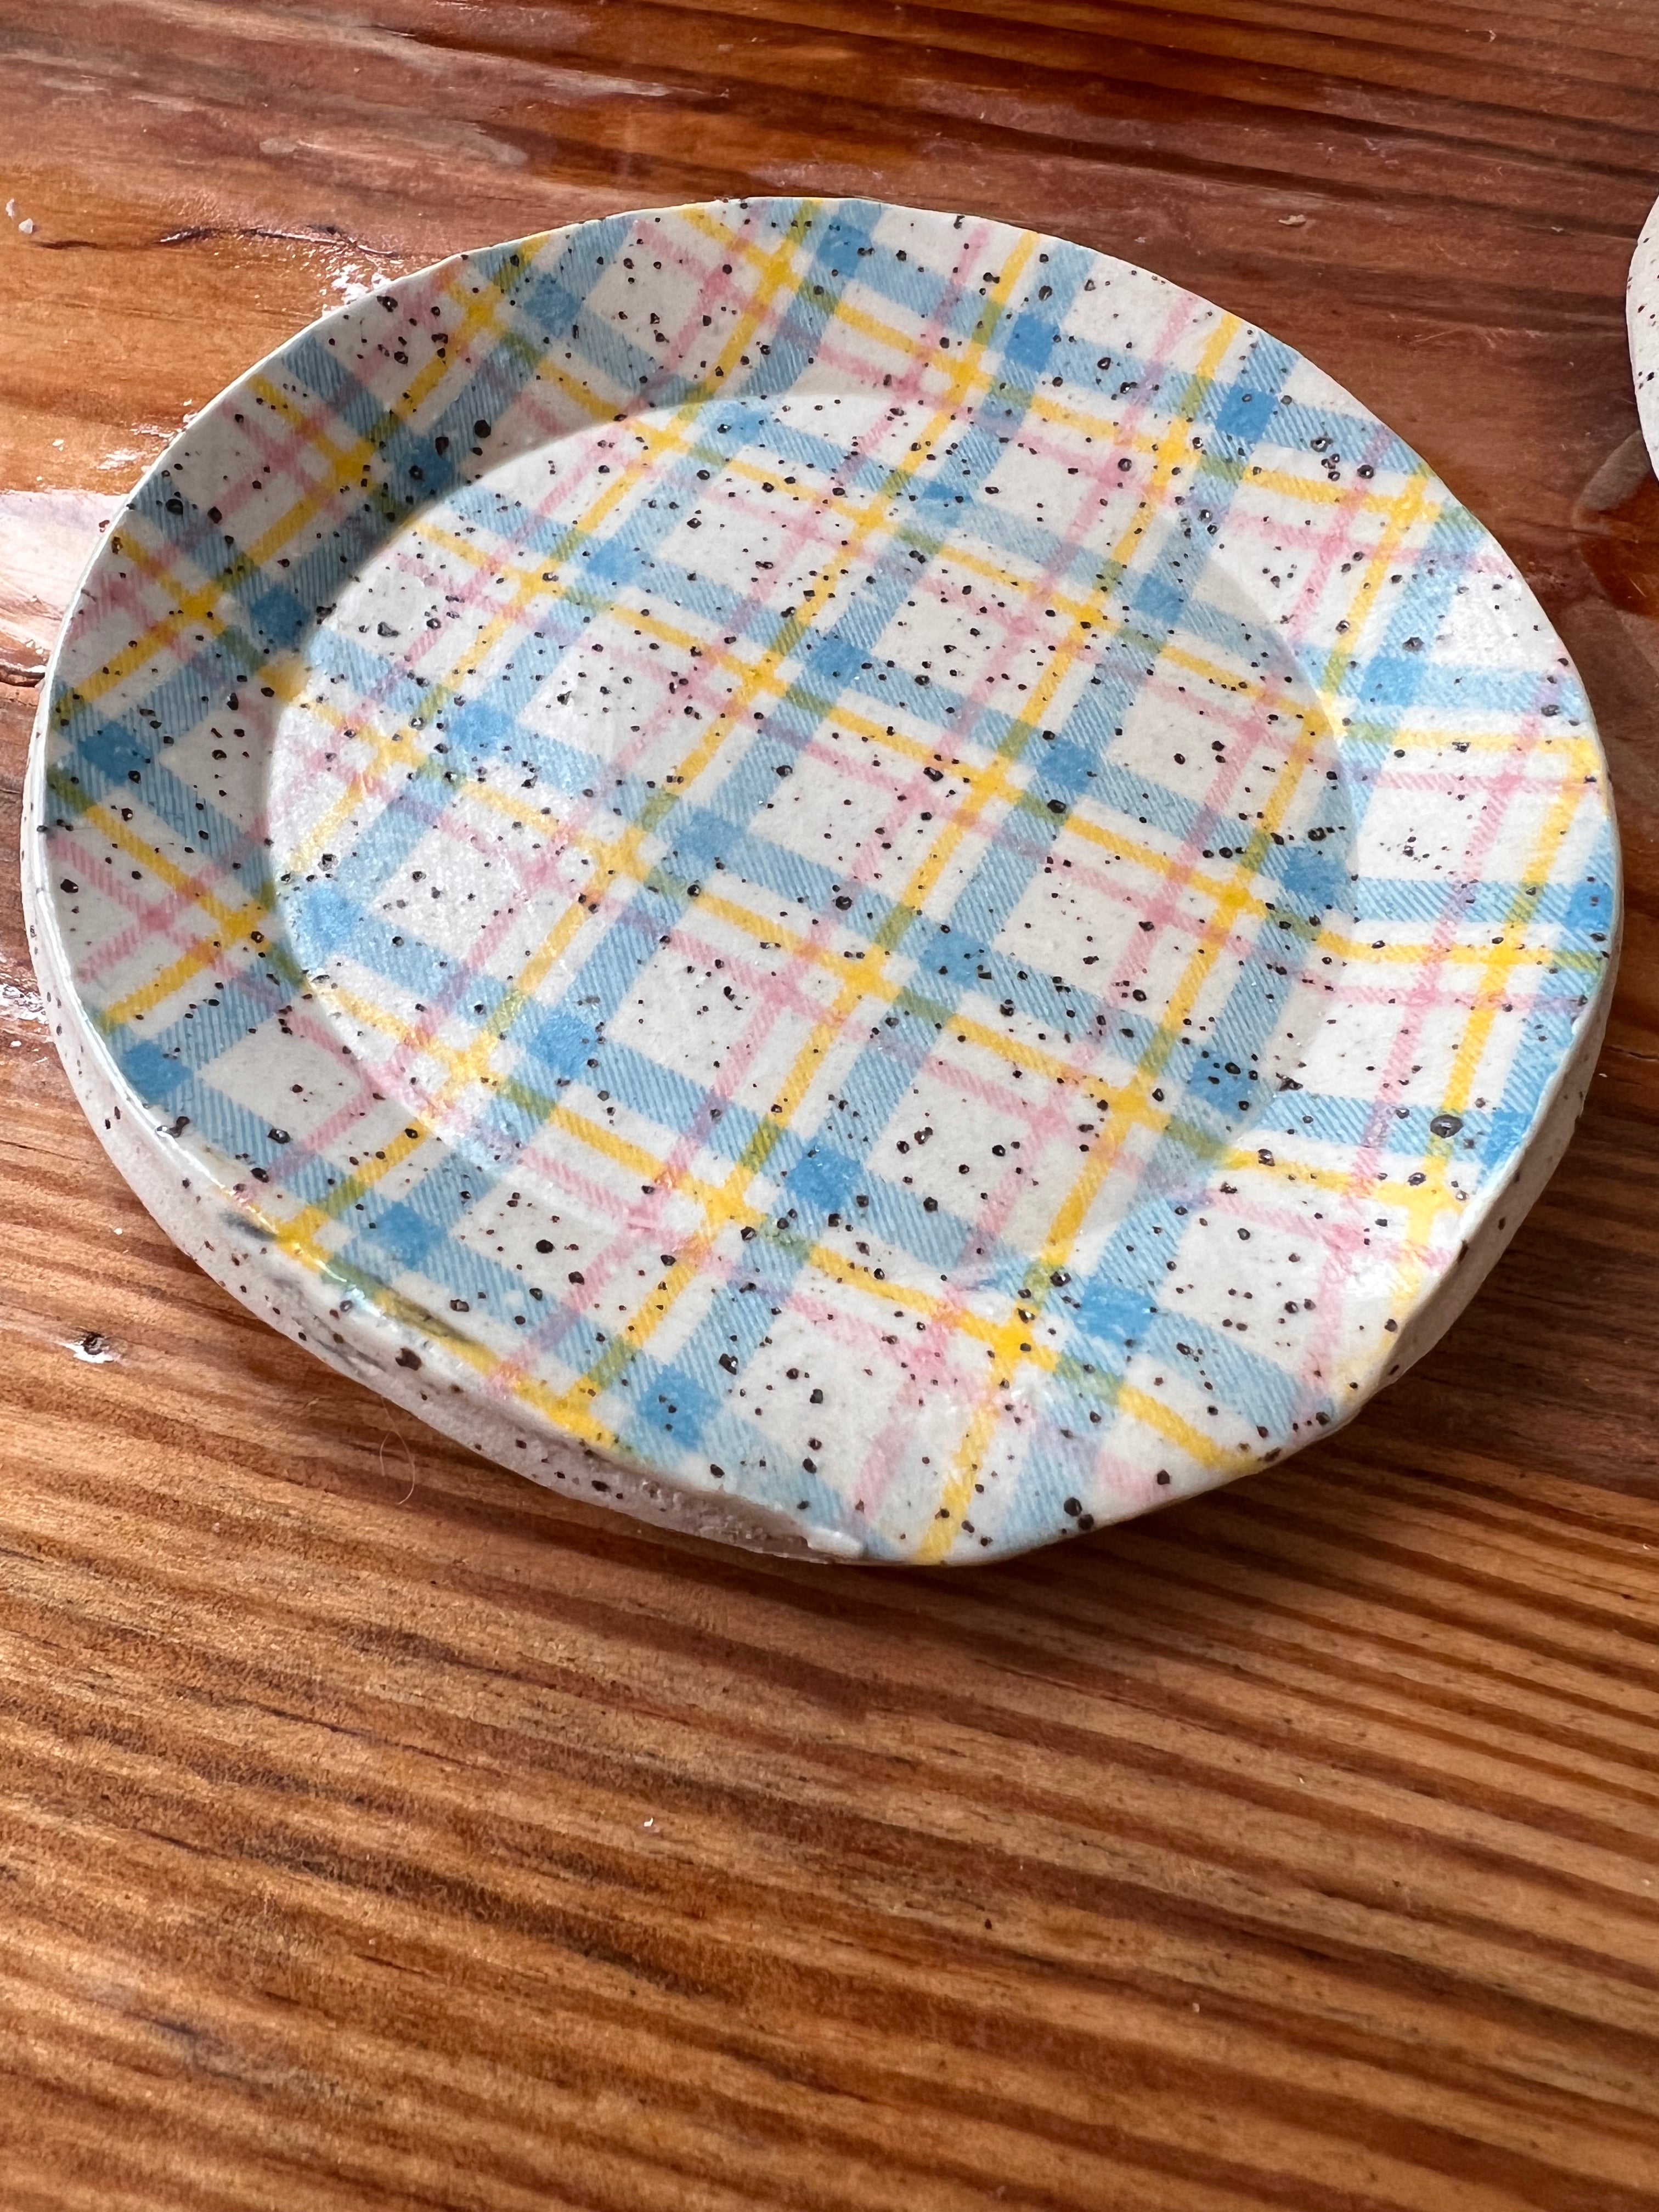 Speckled Plaid Spoon Rest